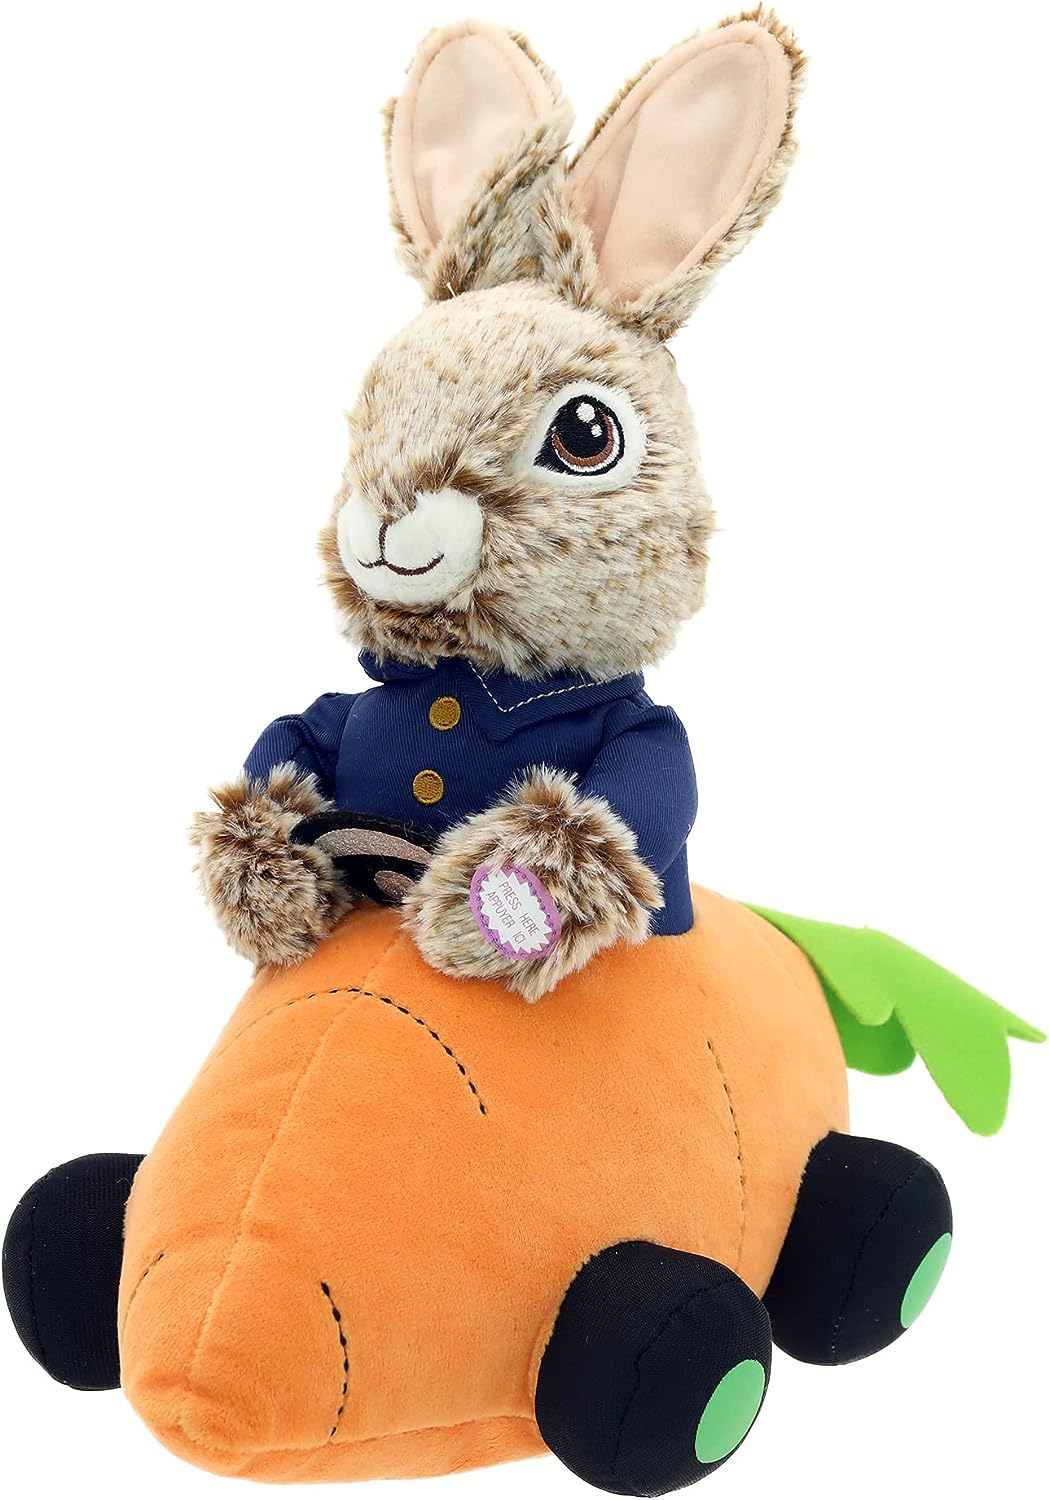 11" Animal Adventure Peter Rabbit Driving a Carrot Car Singing Animated Plush $9.47 & More + Free Shipping w/ Prime or on $35+